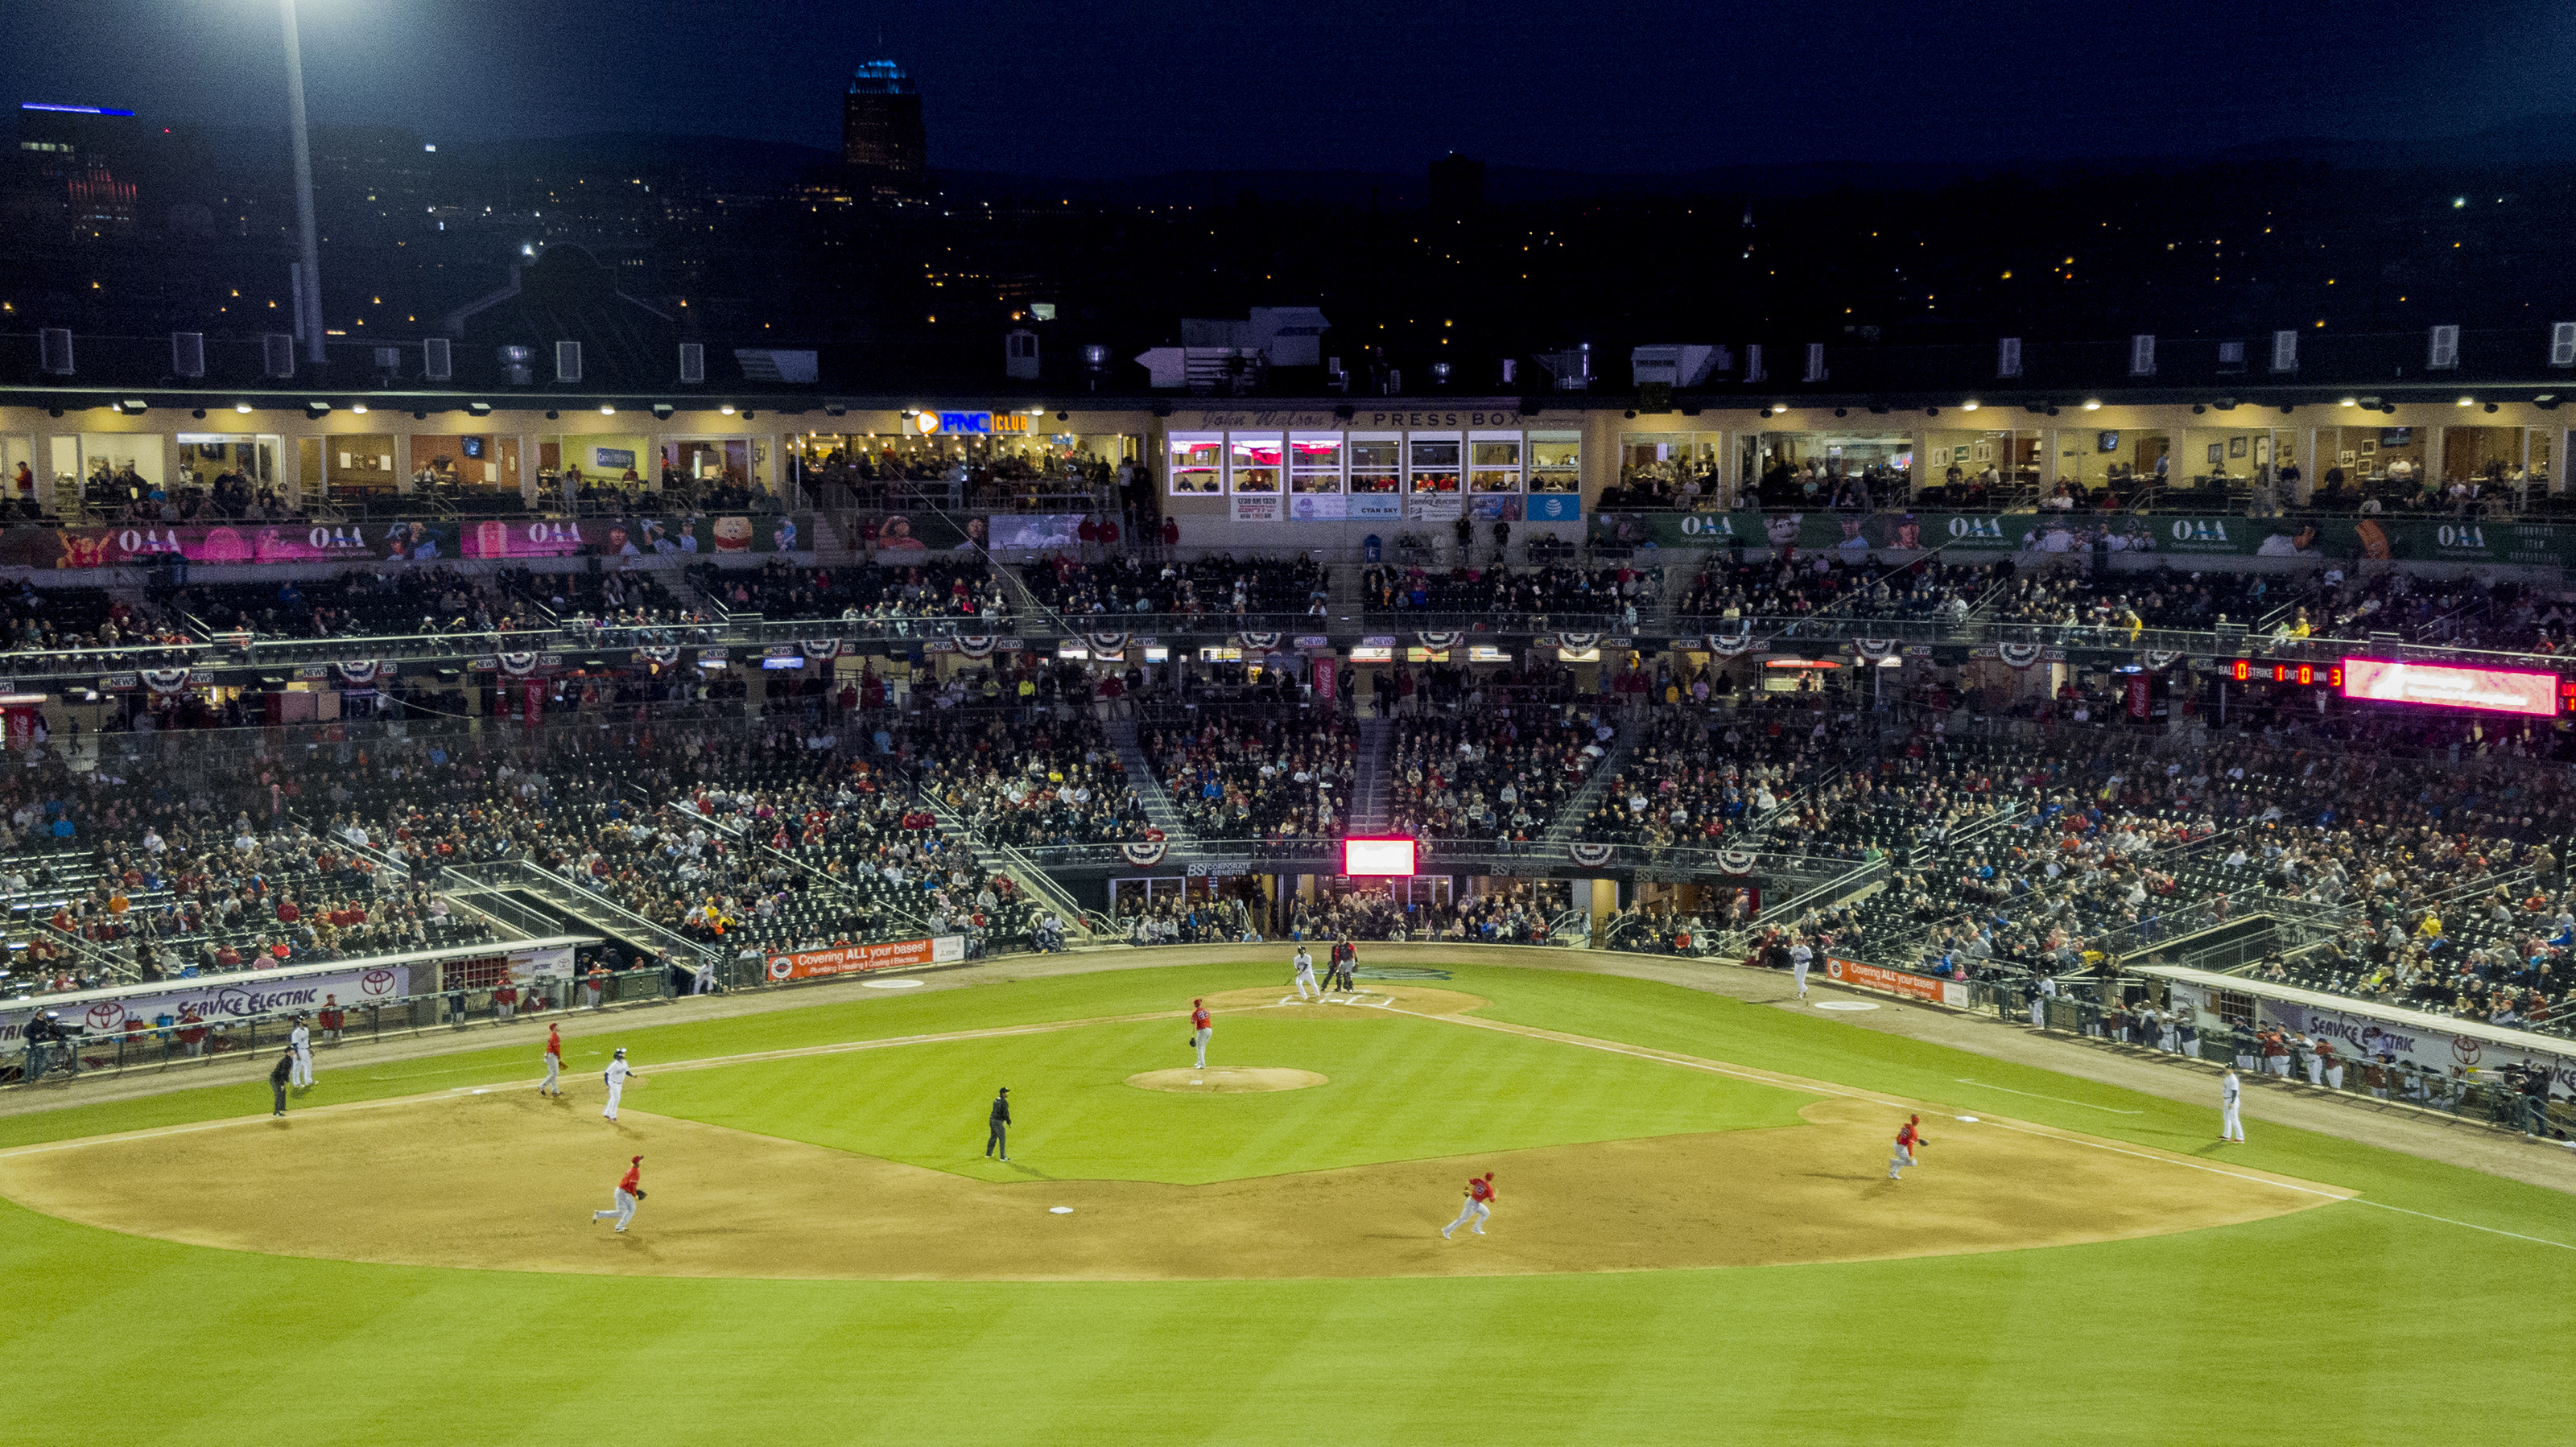 A drone perspective of the action during the Lehigh Valley IronPigs home opener April 12. Photo courtesy of Lehigh Valley Drone.